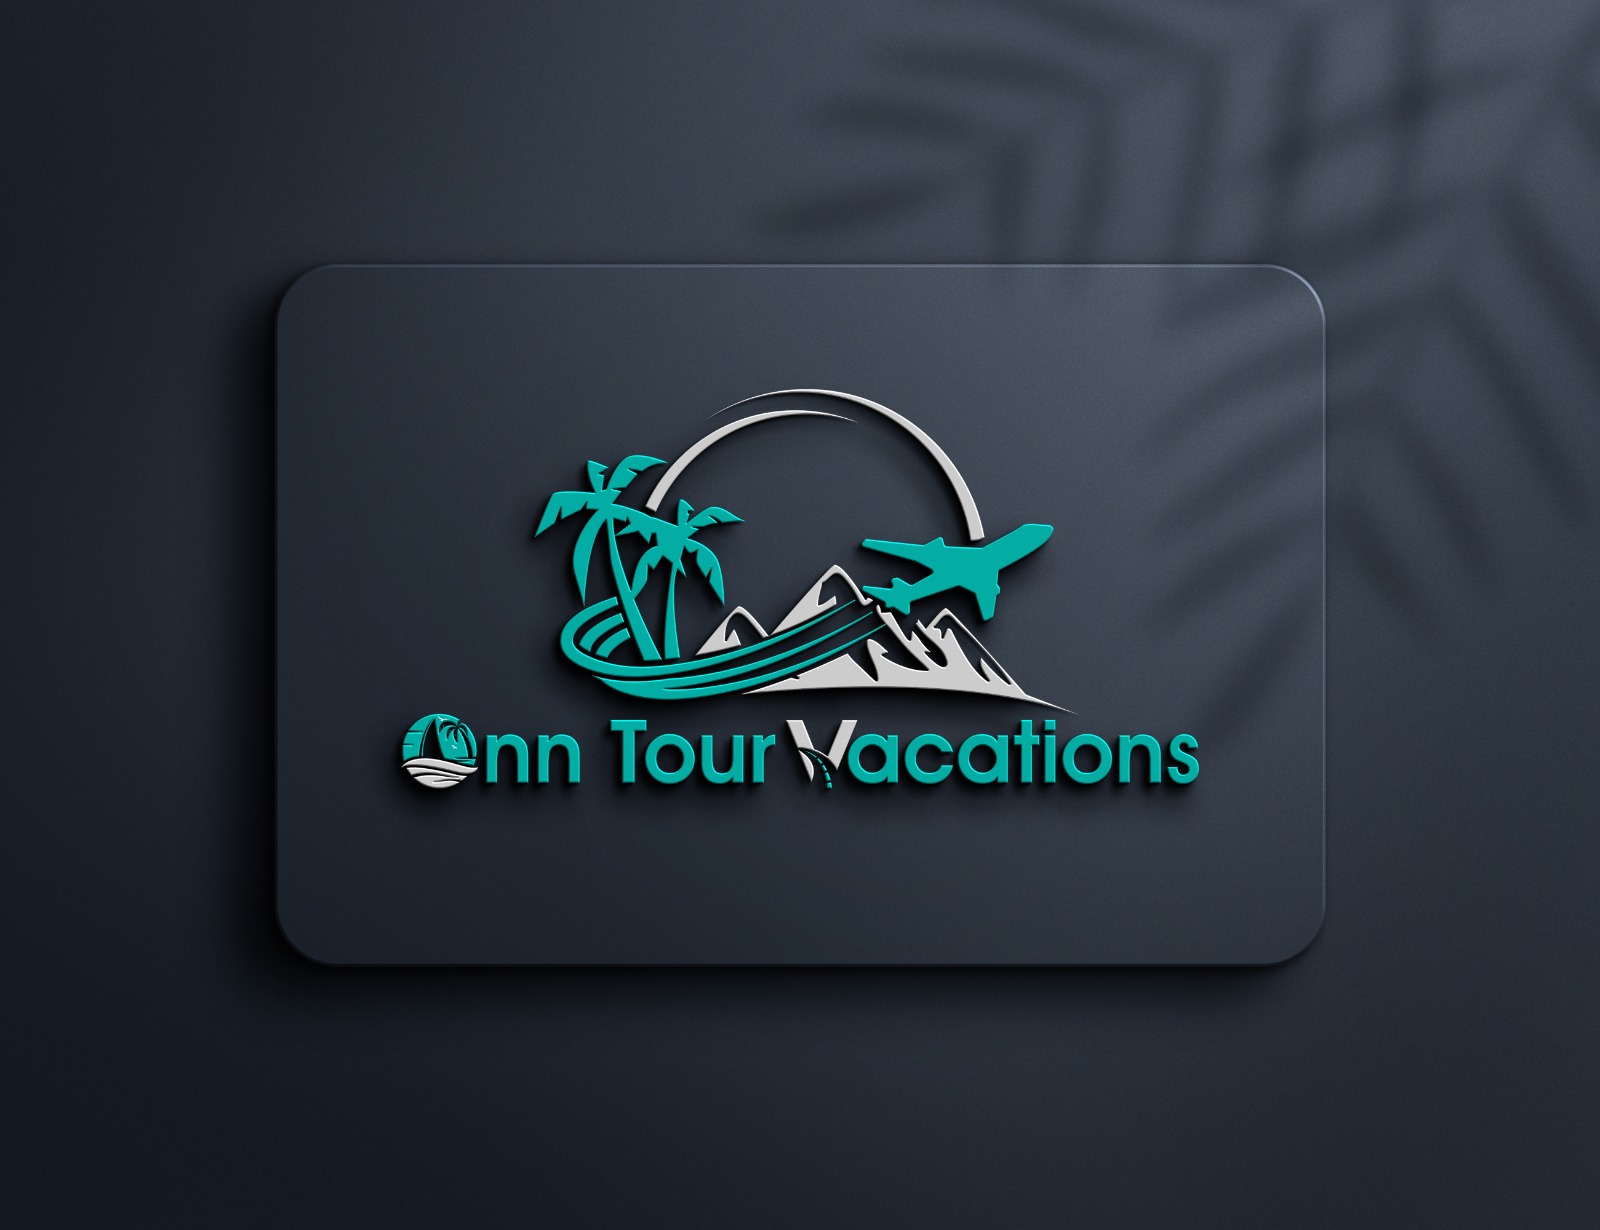 Onn Tour Vacations